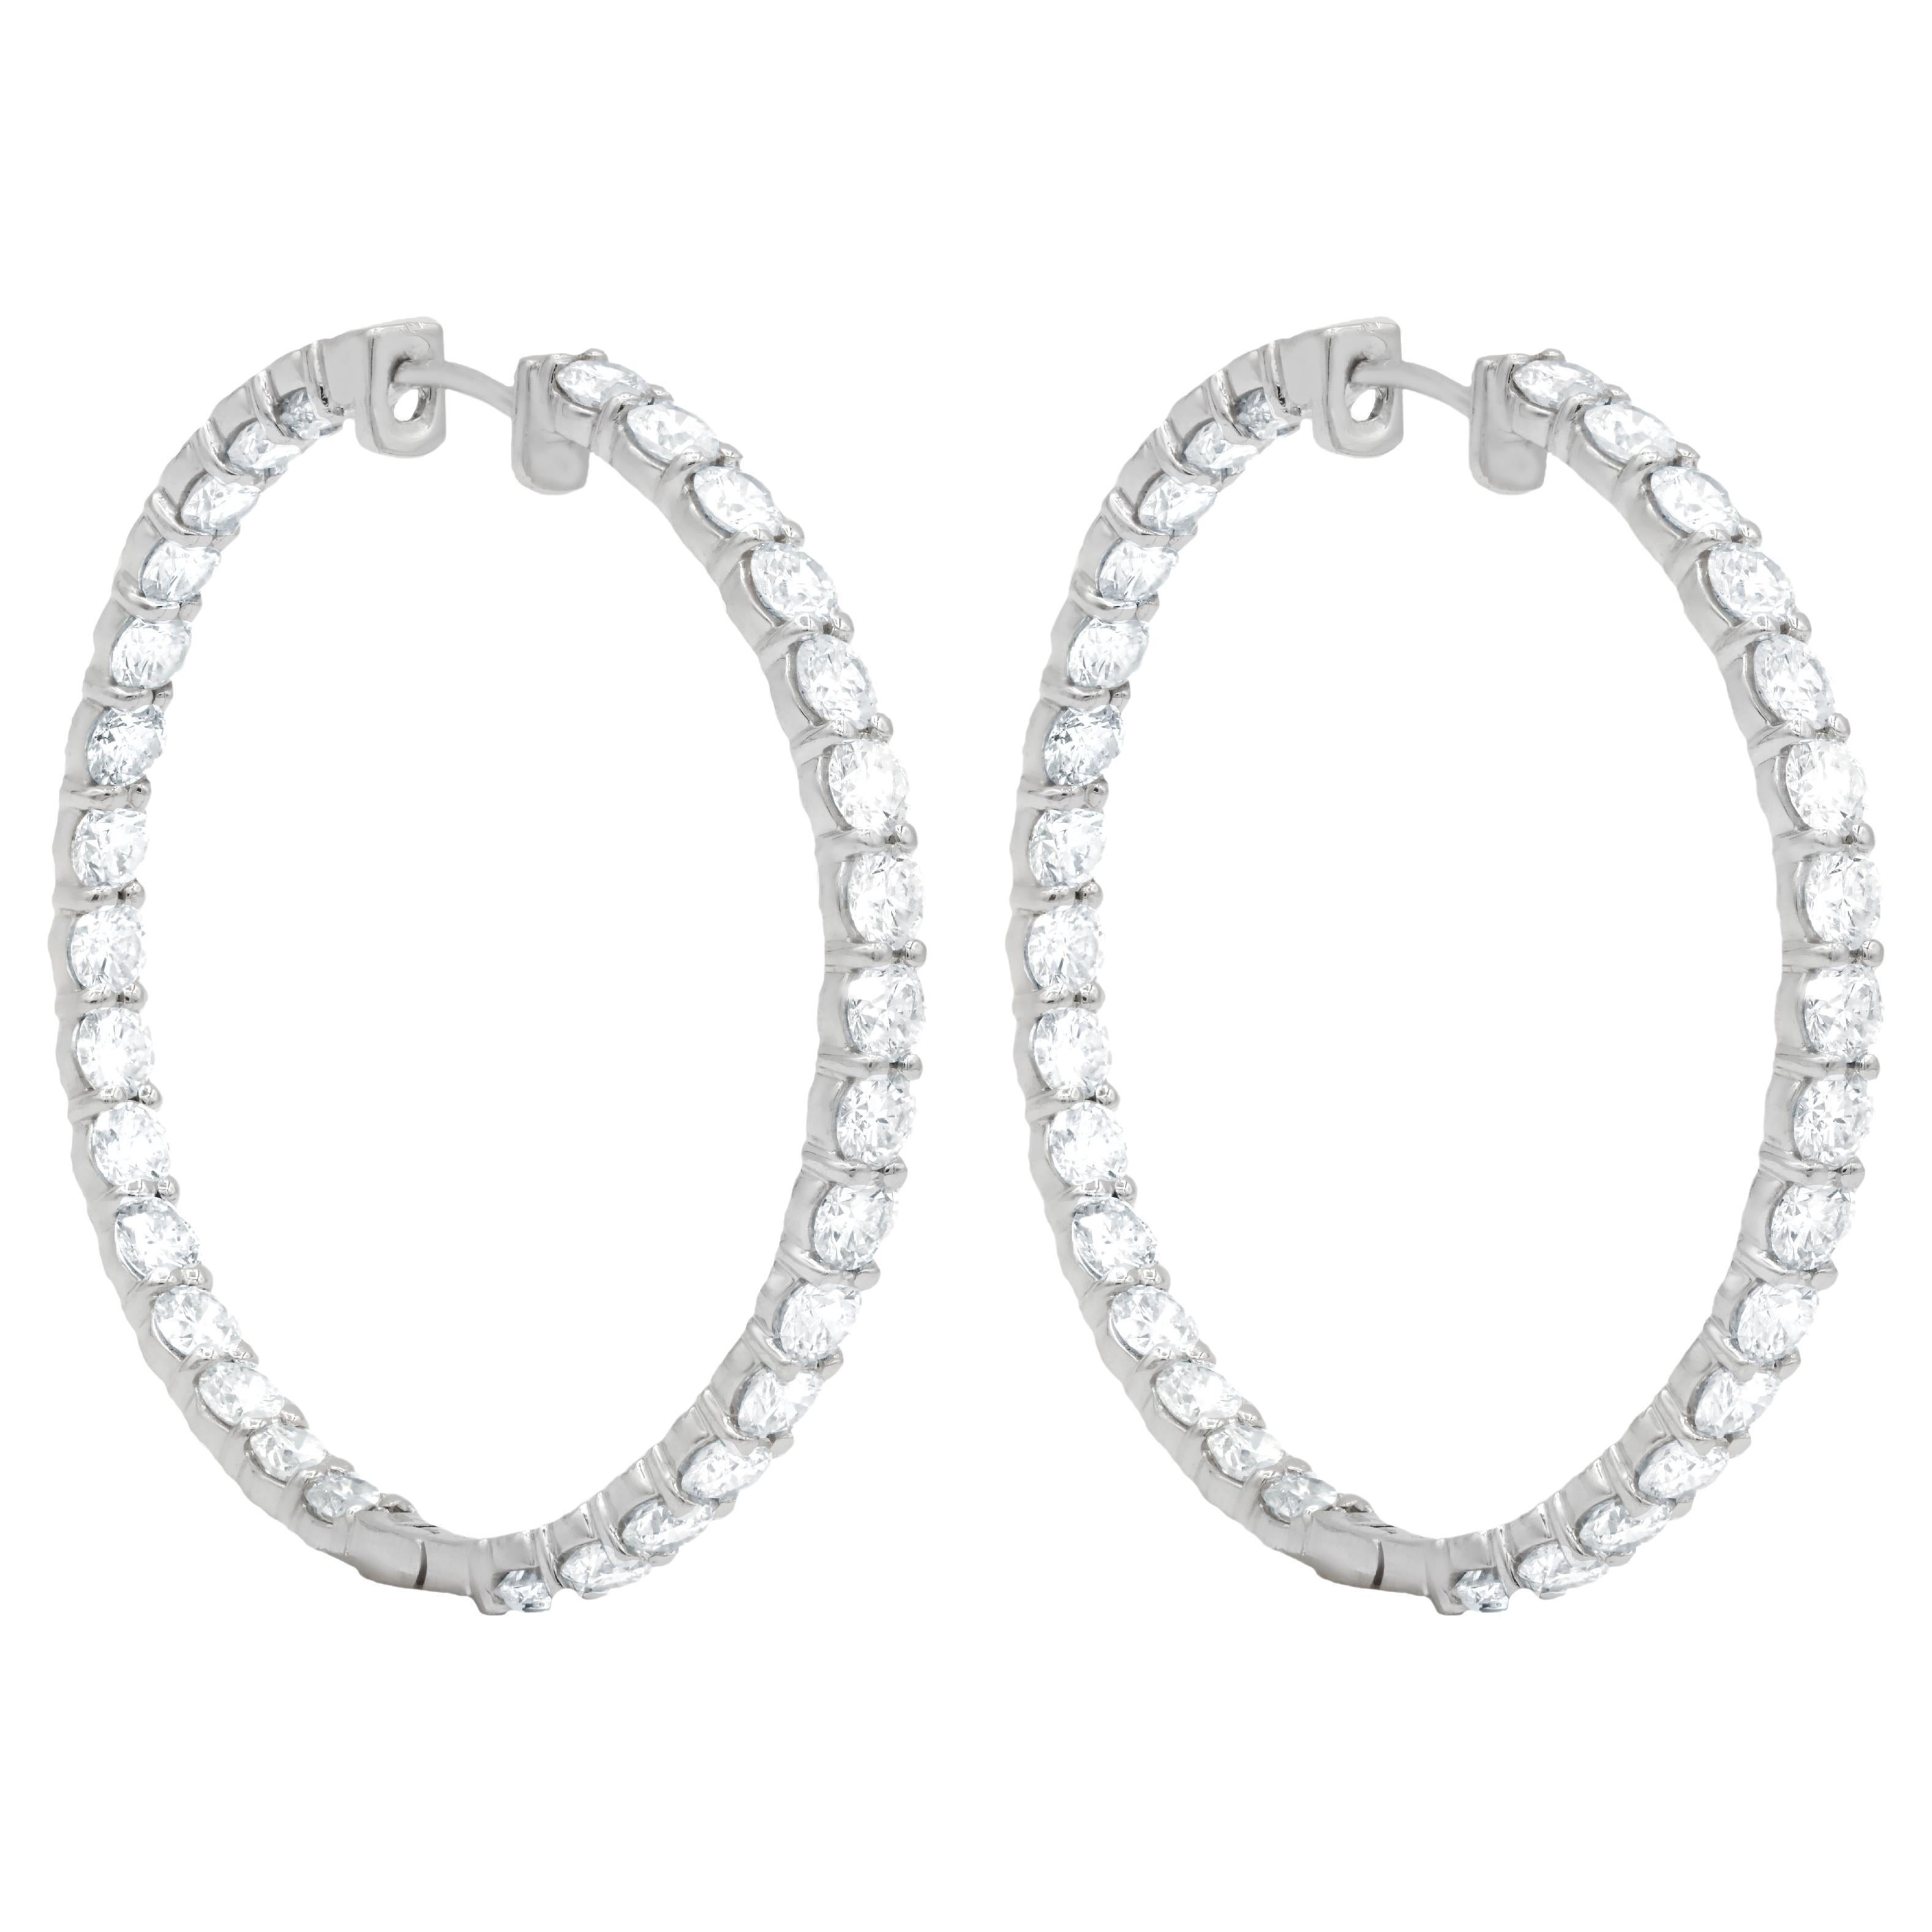 Diana M. 18 kt white gold inside-out hoop earrings adorned with 15.60 cts For Sale